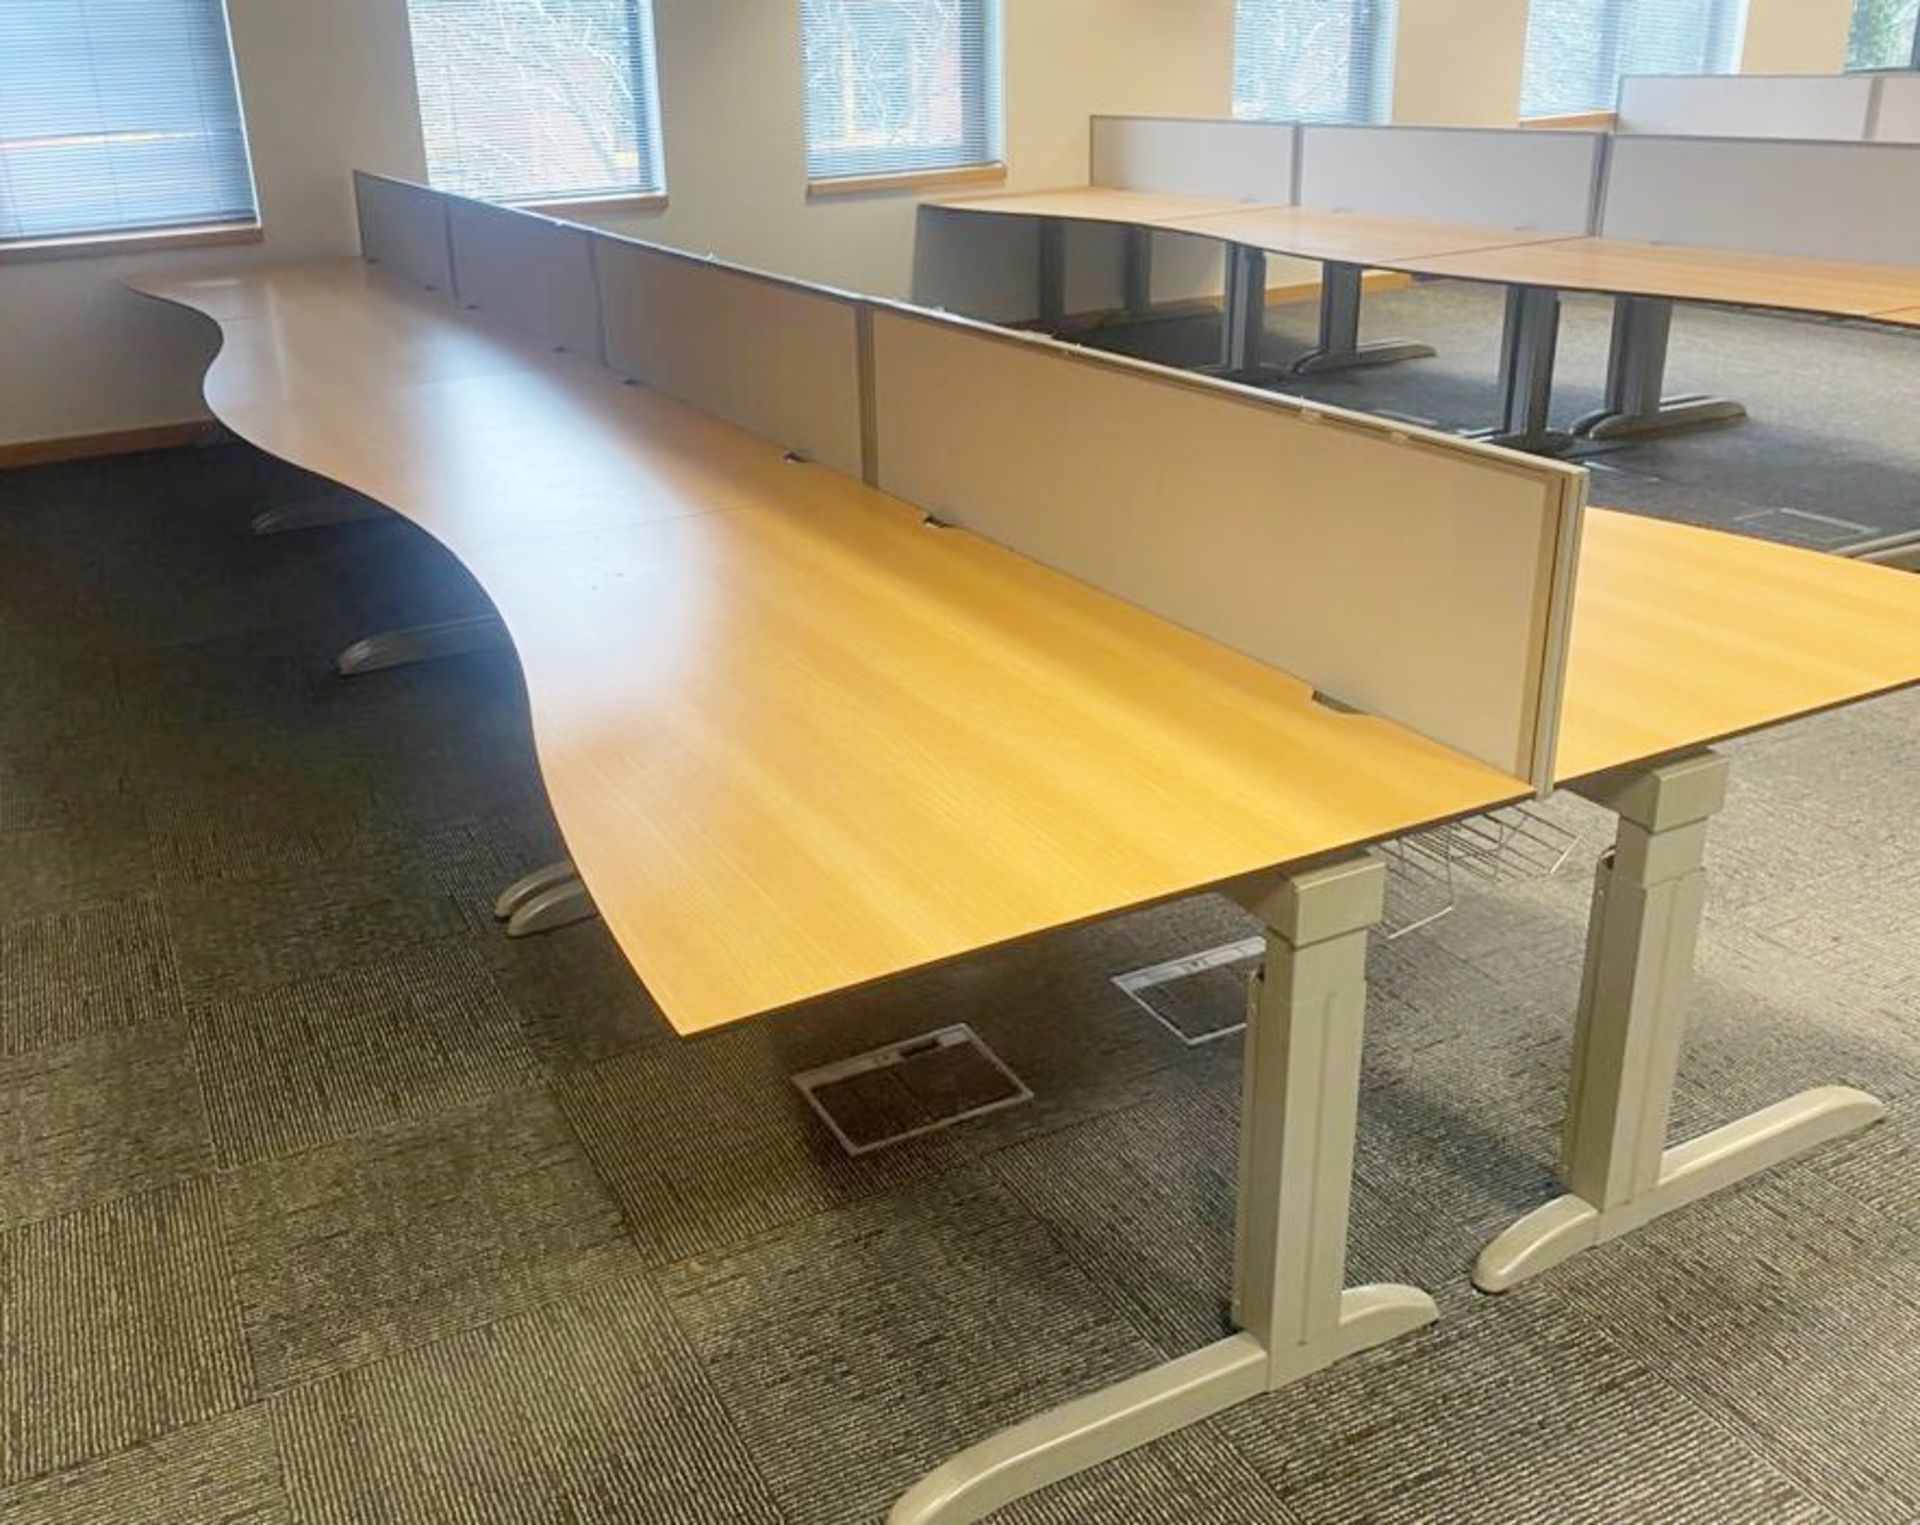 4 x Techo Wave Office Desks With Privacy Panels and Cable Tidy Cages - Beech Wood Finish with Grey - Image 2 of 20